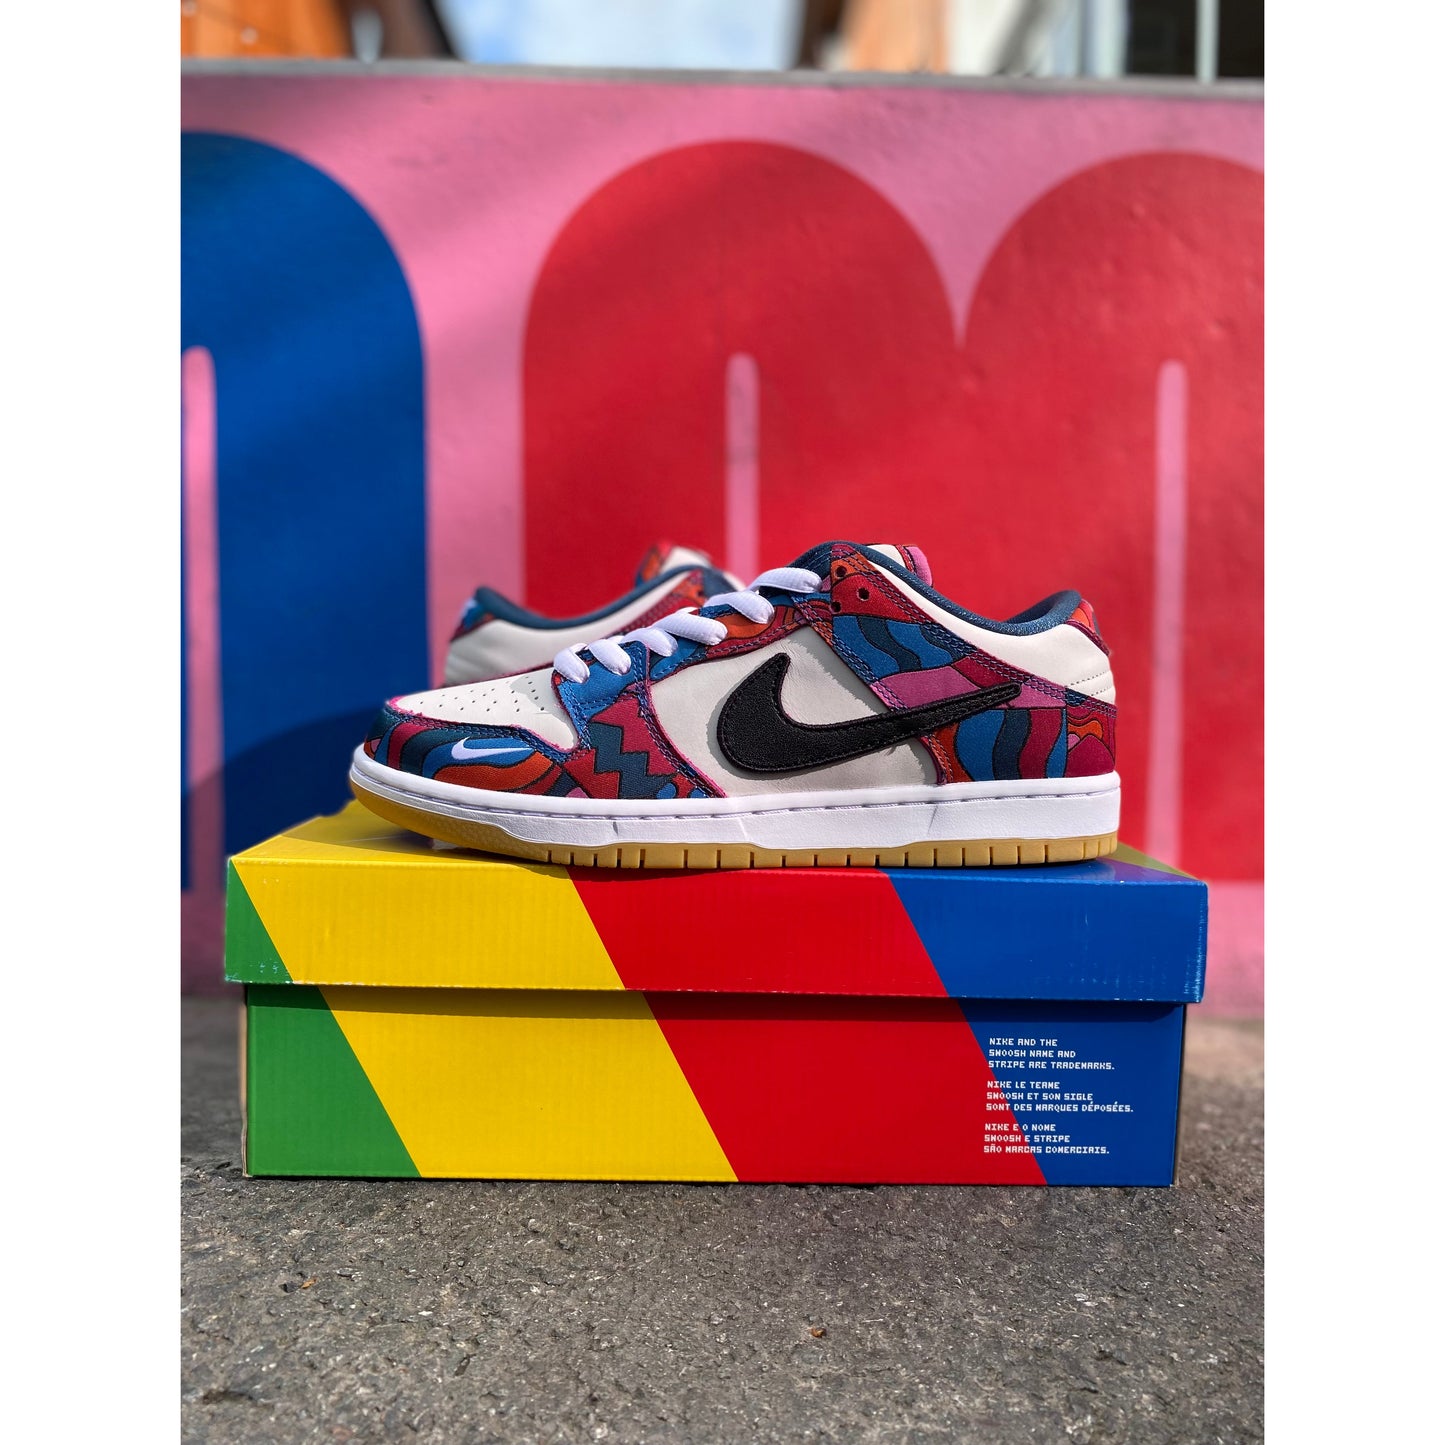 Nike SB Dunk Low Pro Parra Abstract Art (2021) from Nike